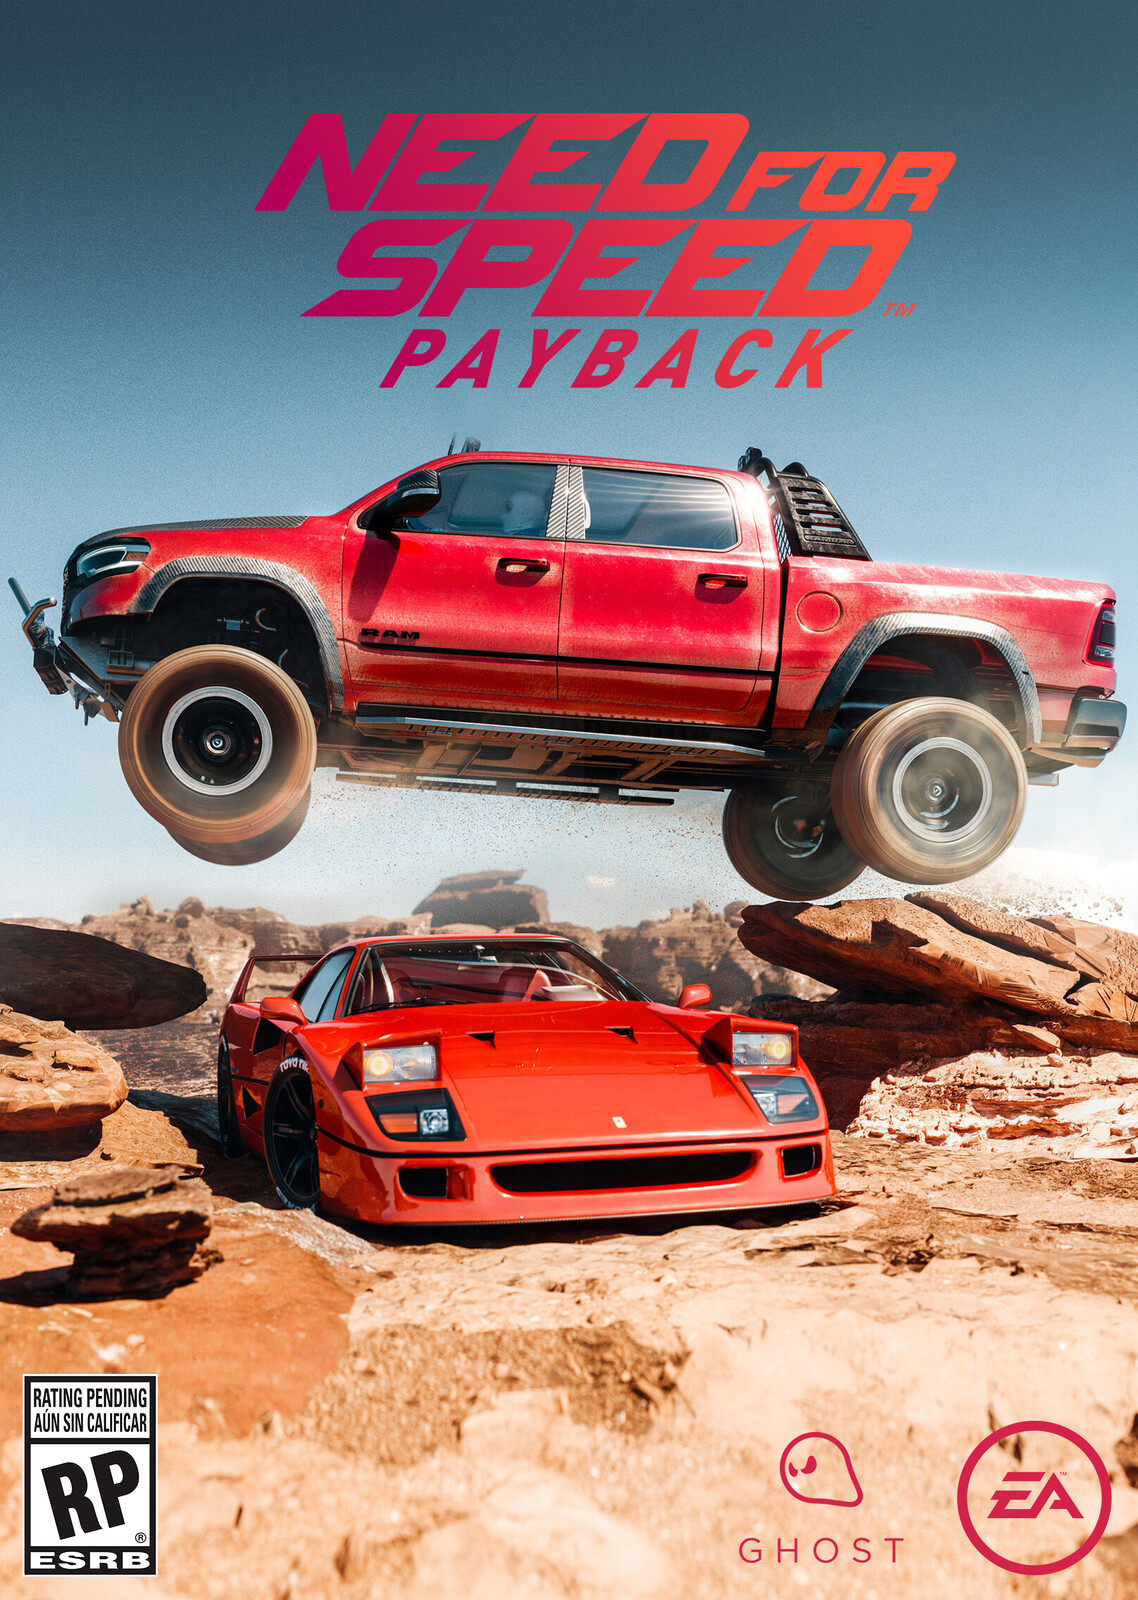 Need for Speed Payback (Original Image by @Artem)